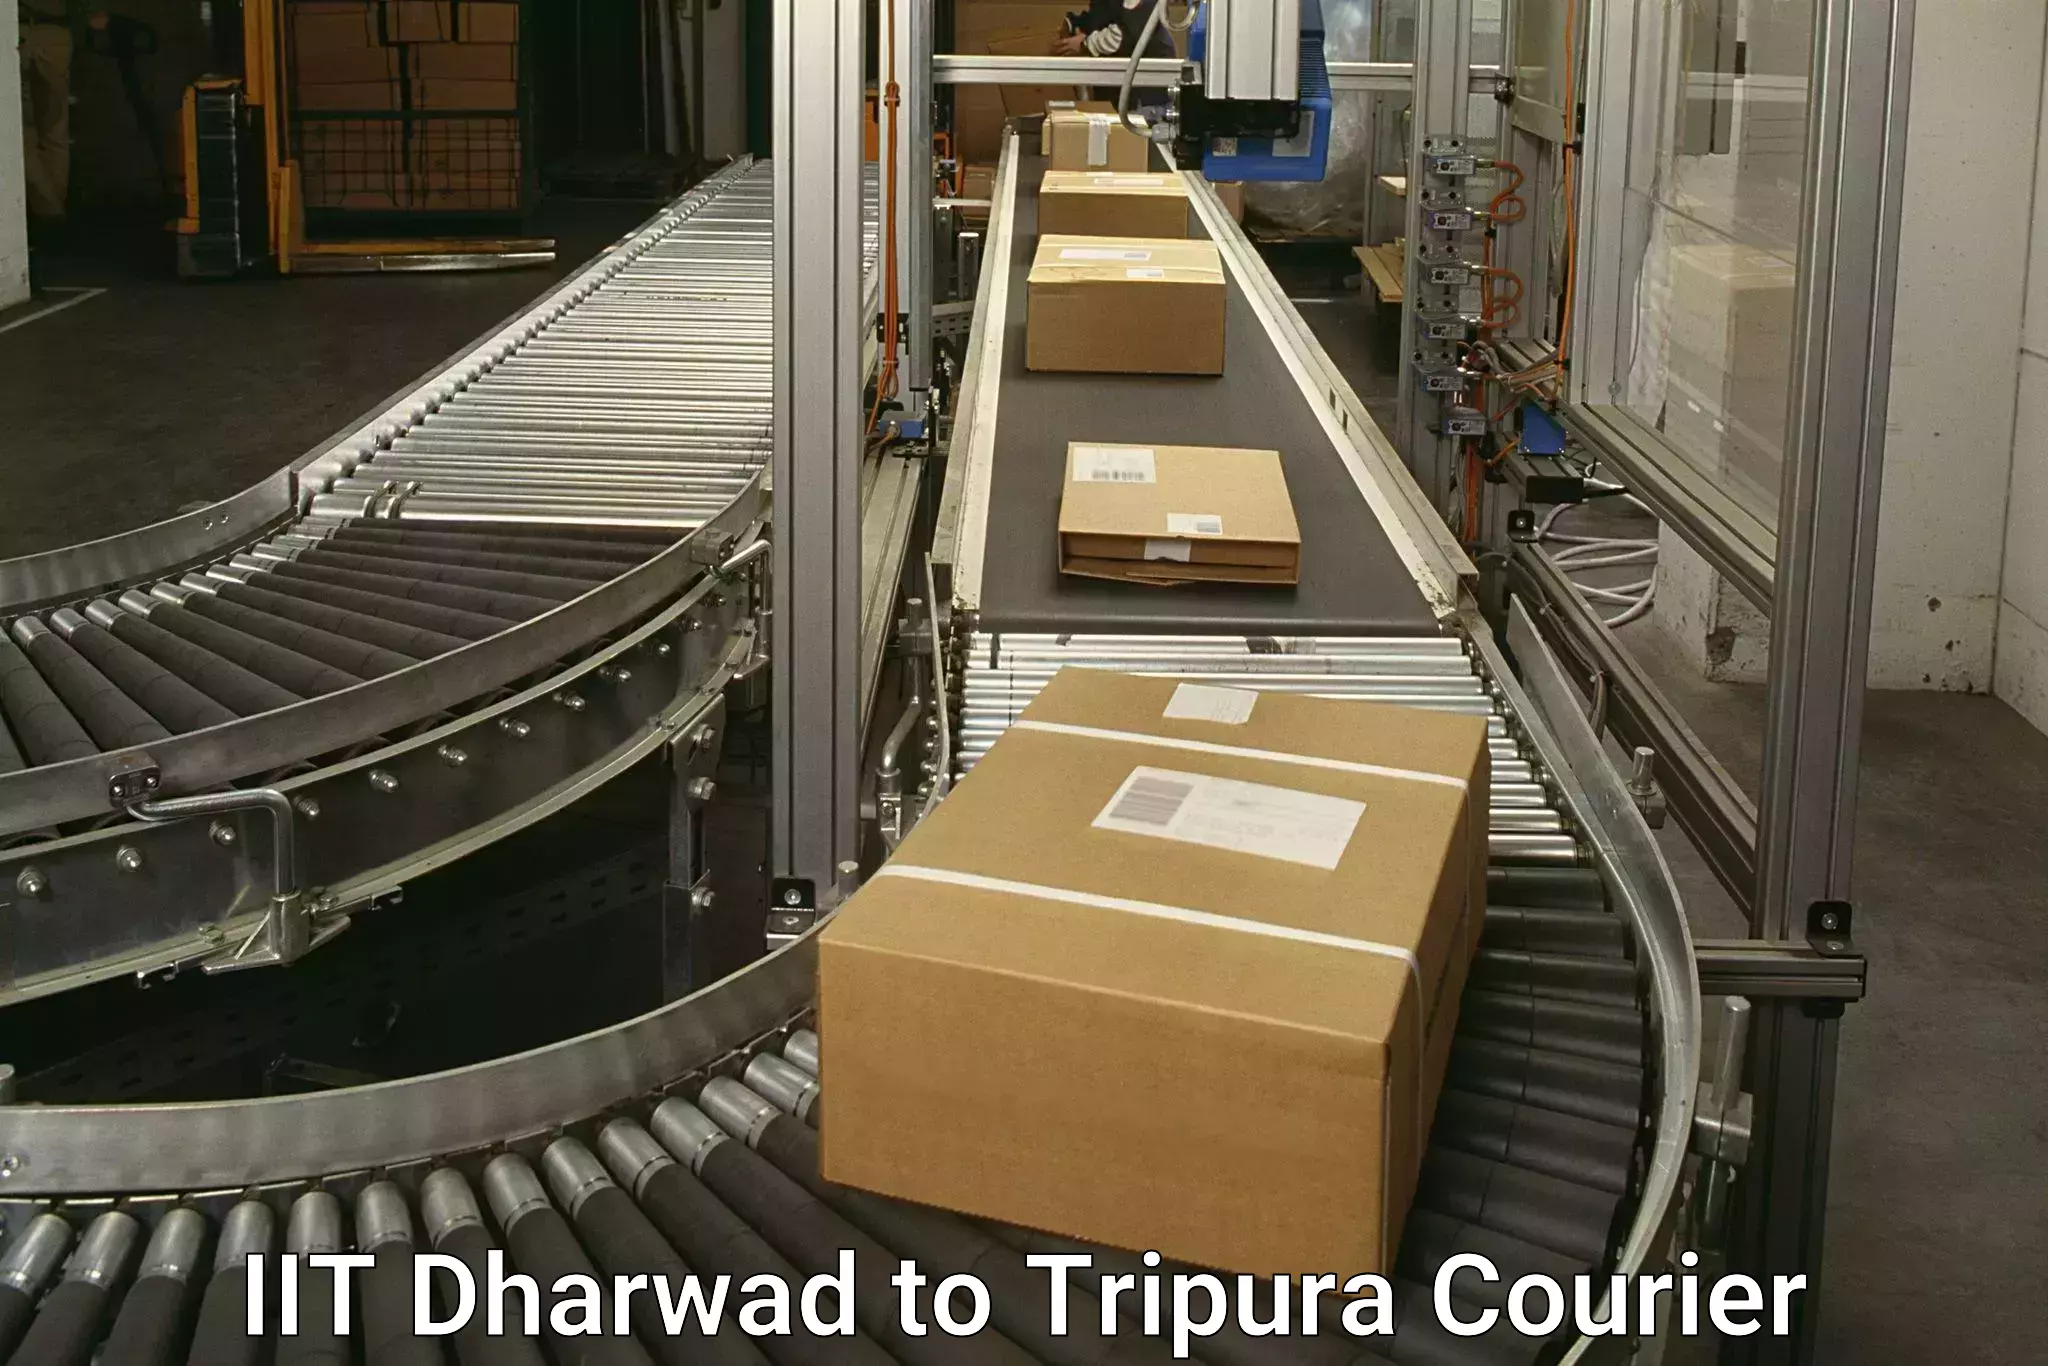 Express package delivery in IIT Dharwad to Dharmanagar